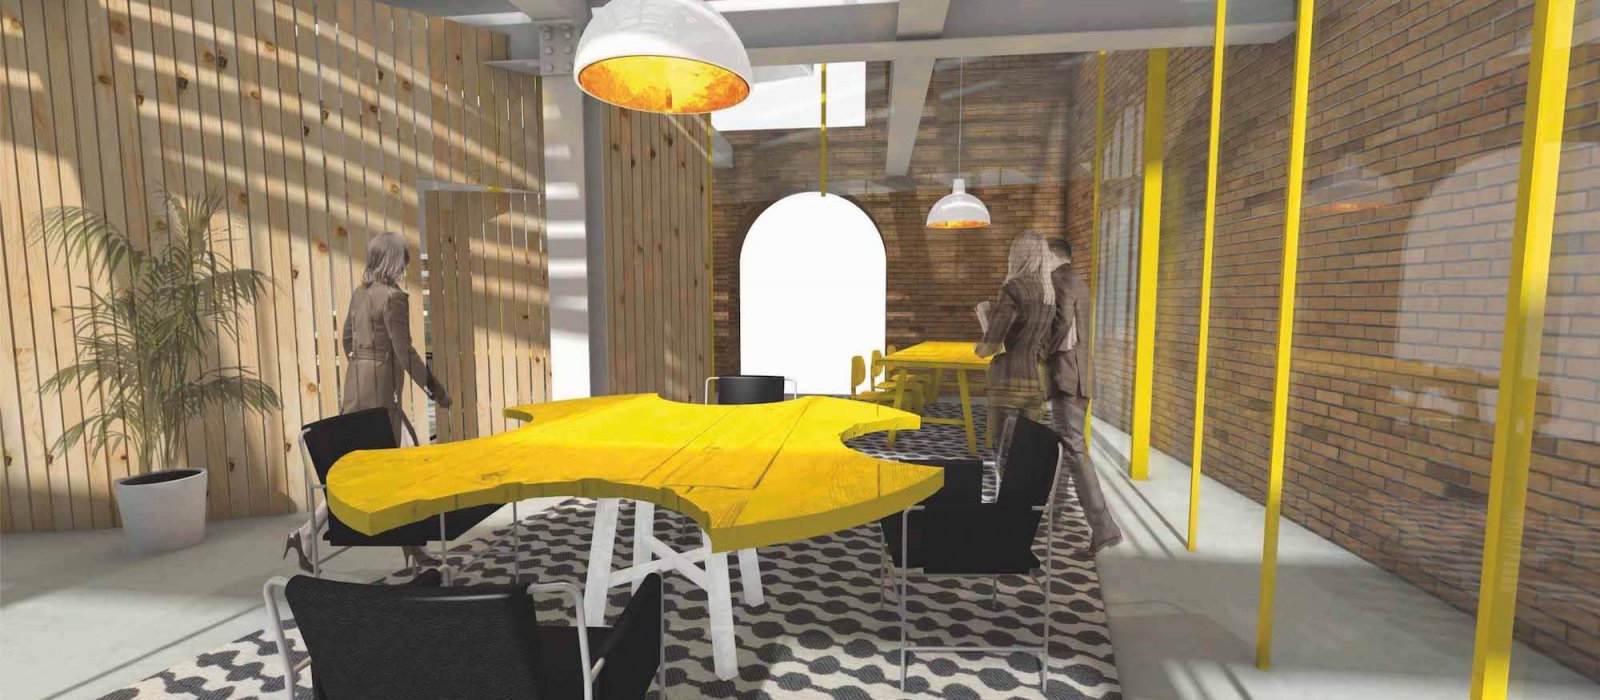 Digital artwork of interior with yellow table and black chairs with wooden and brlck walls